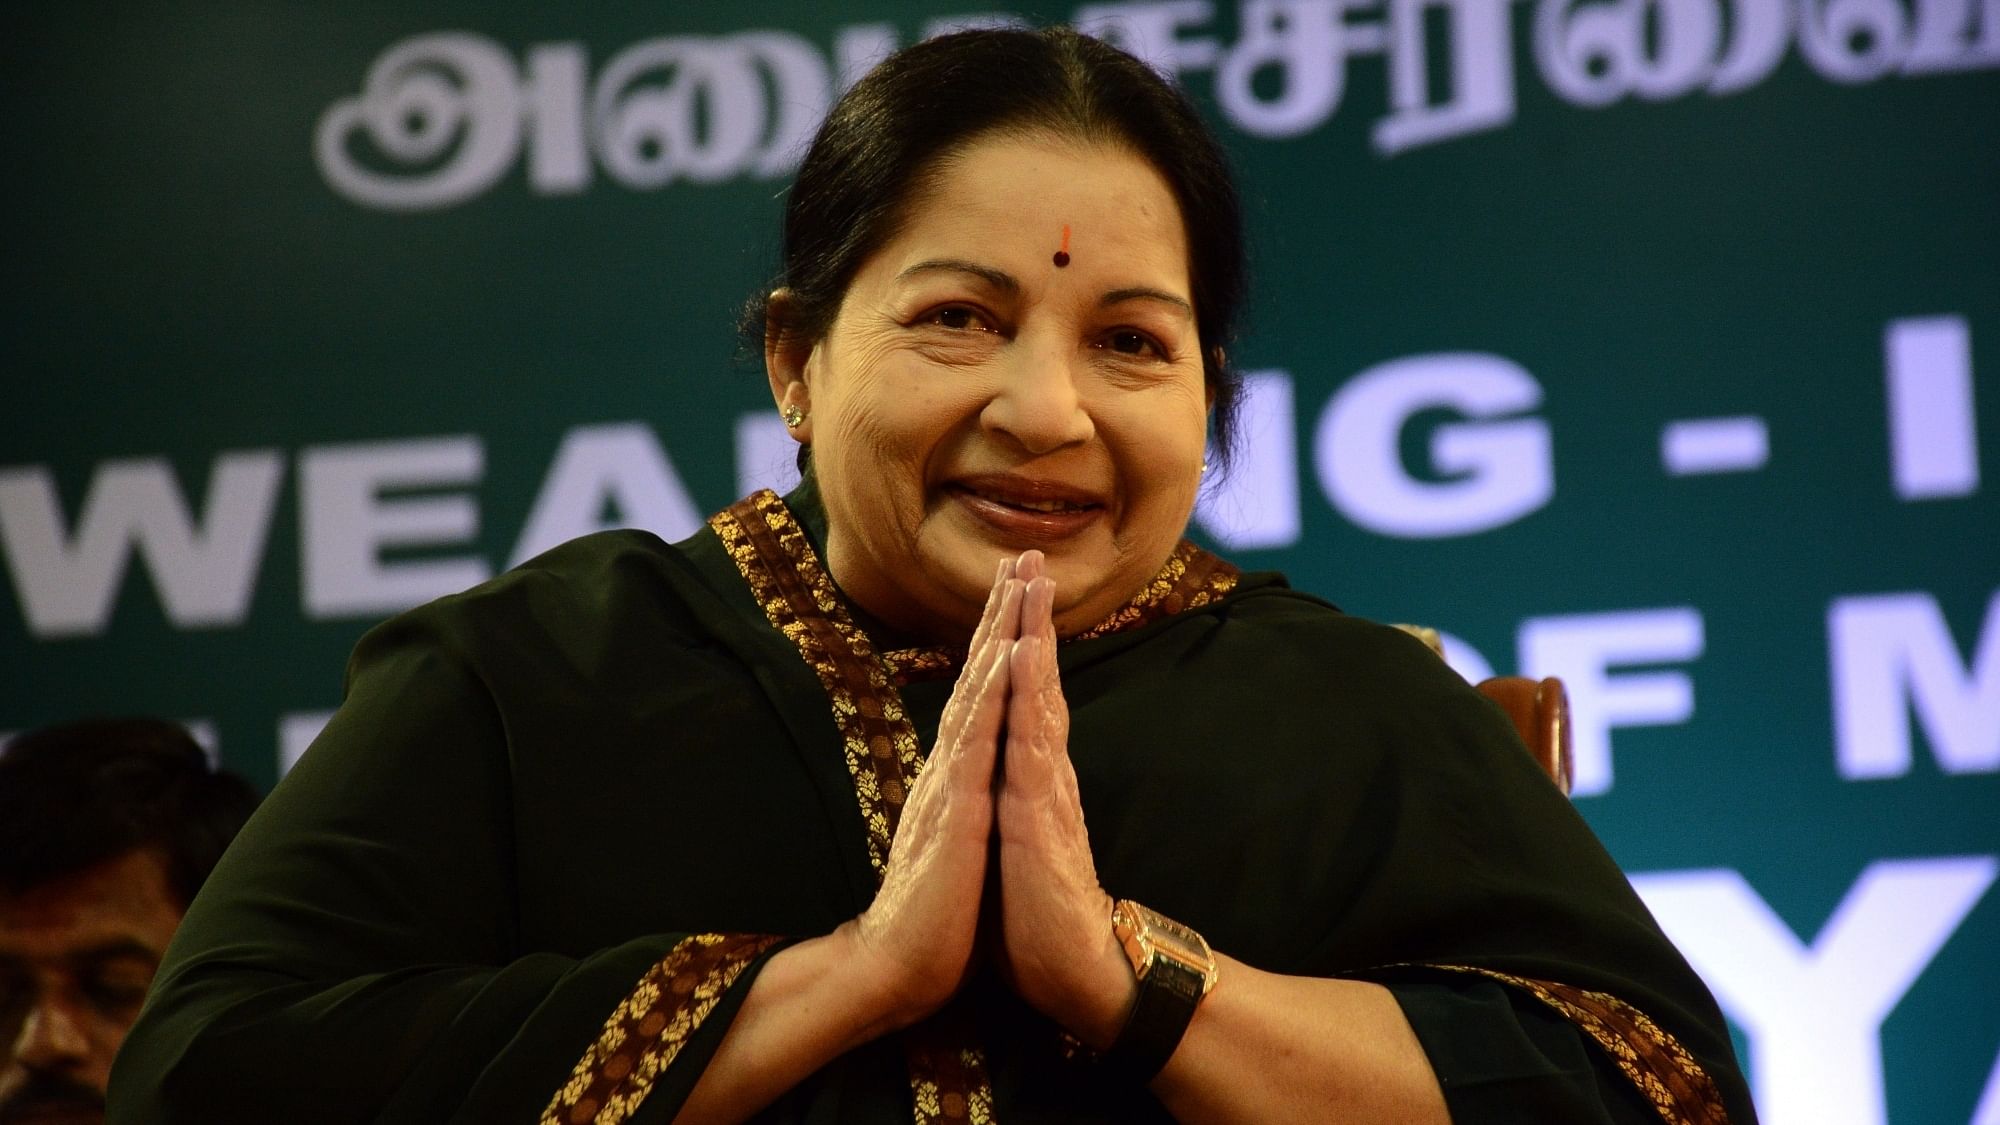 Tamil Nadu Chief Minister Jayalalithaa was admitted to the Apollo Hospitals on Thursday. (Photo: IANS)